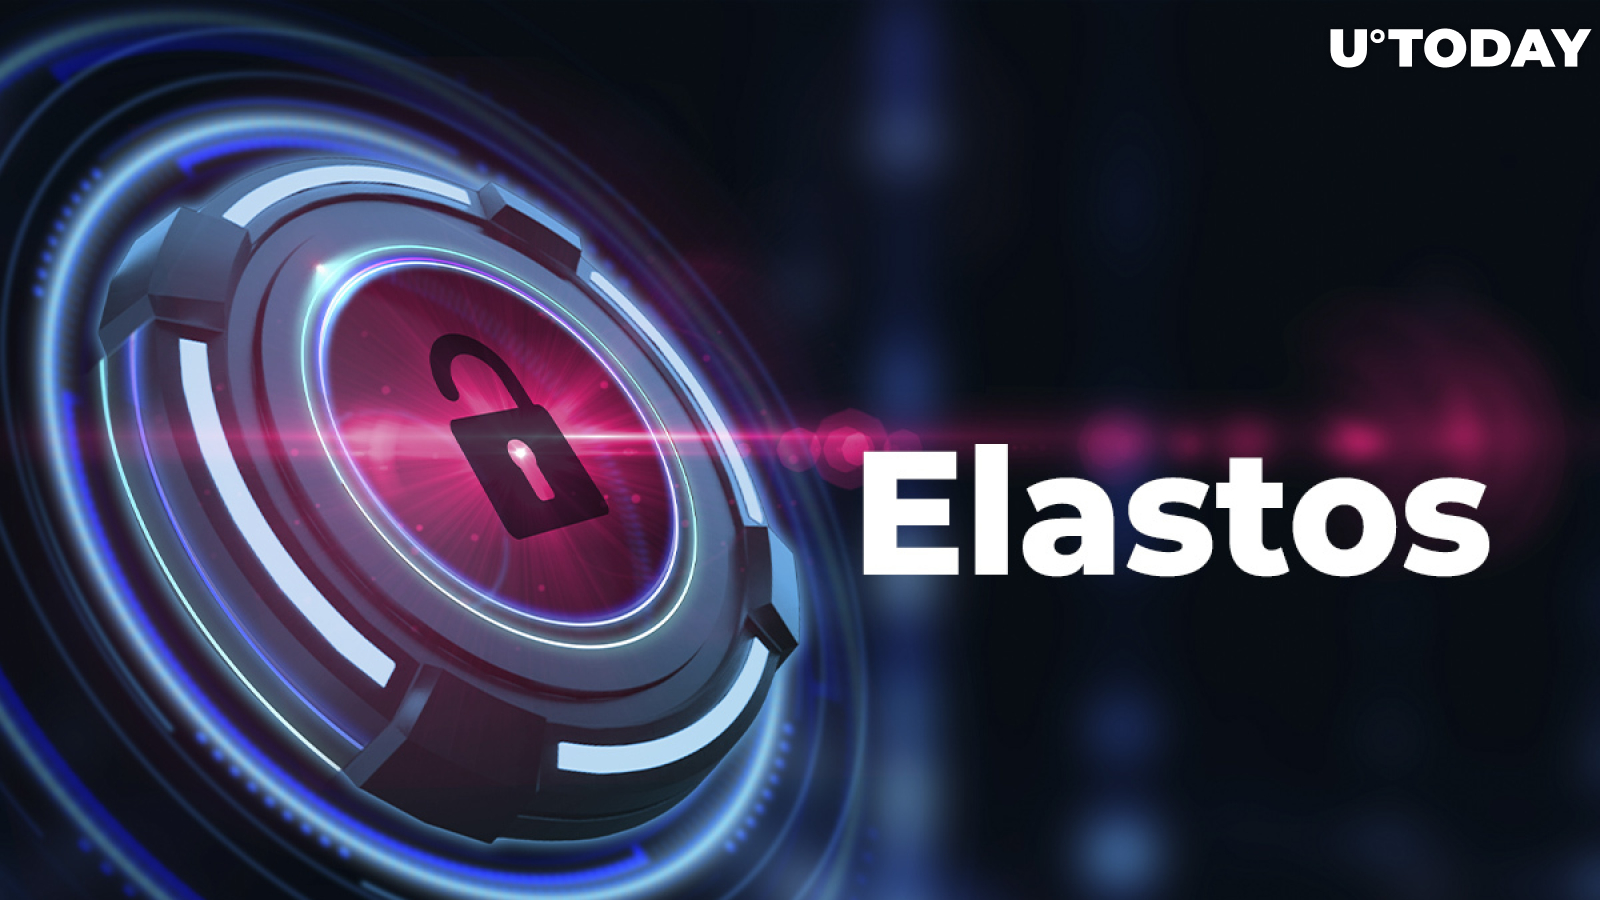 Elastos Community Introduces Hyper Privacy-Focused Messenger, Teases DAO Launch